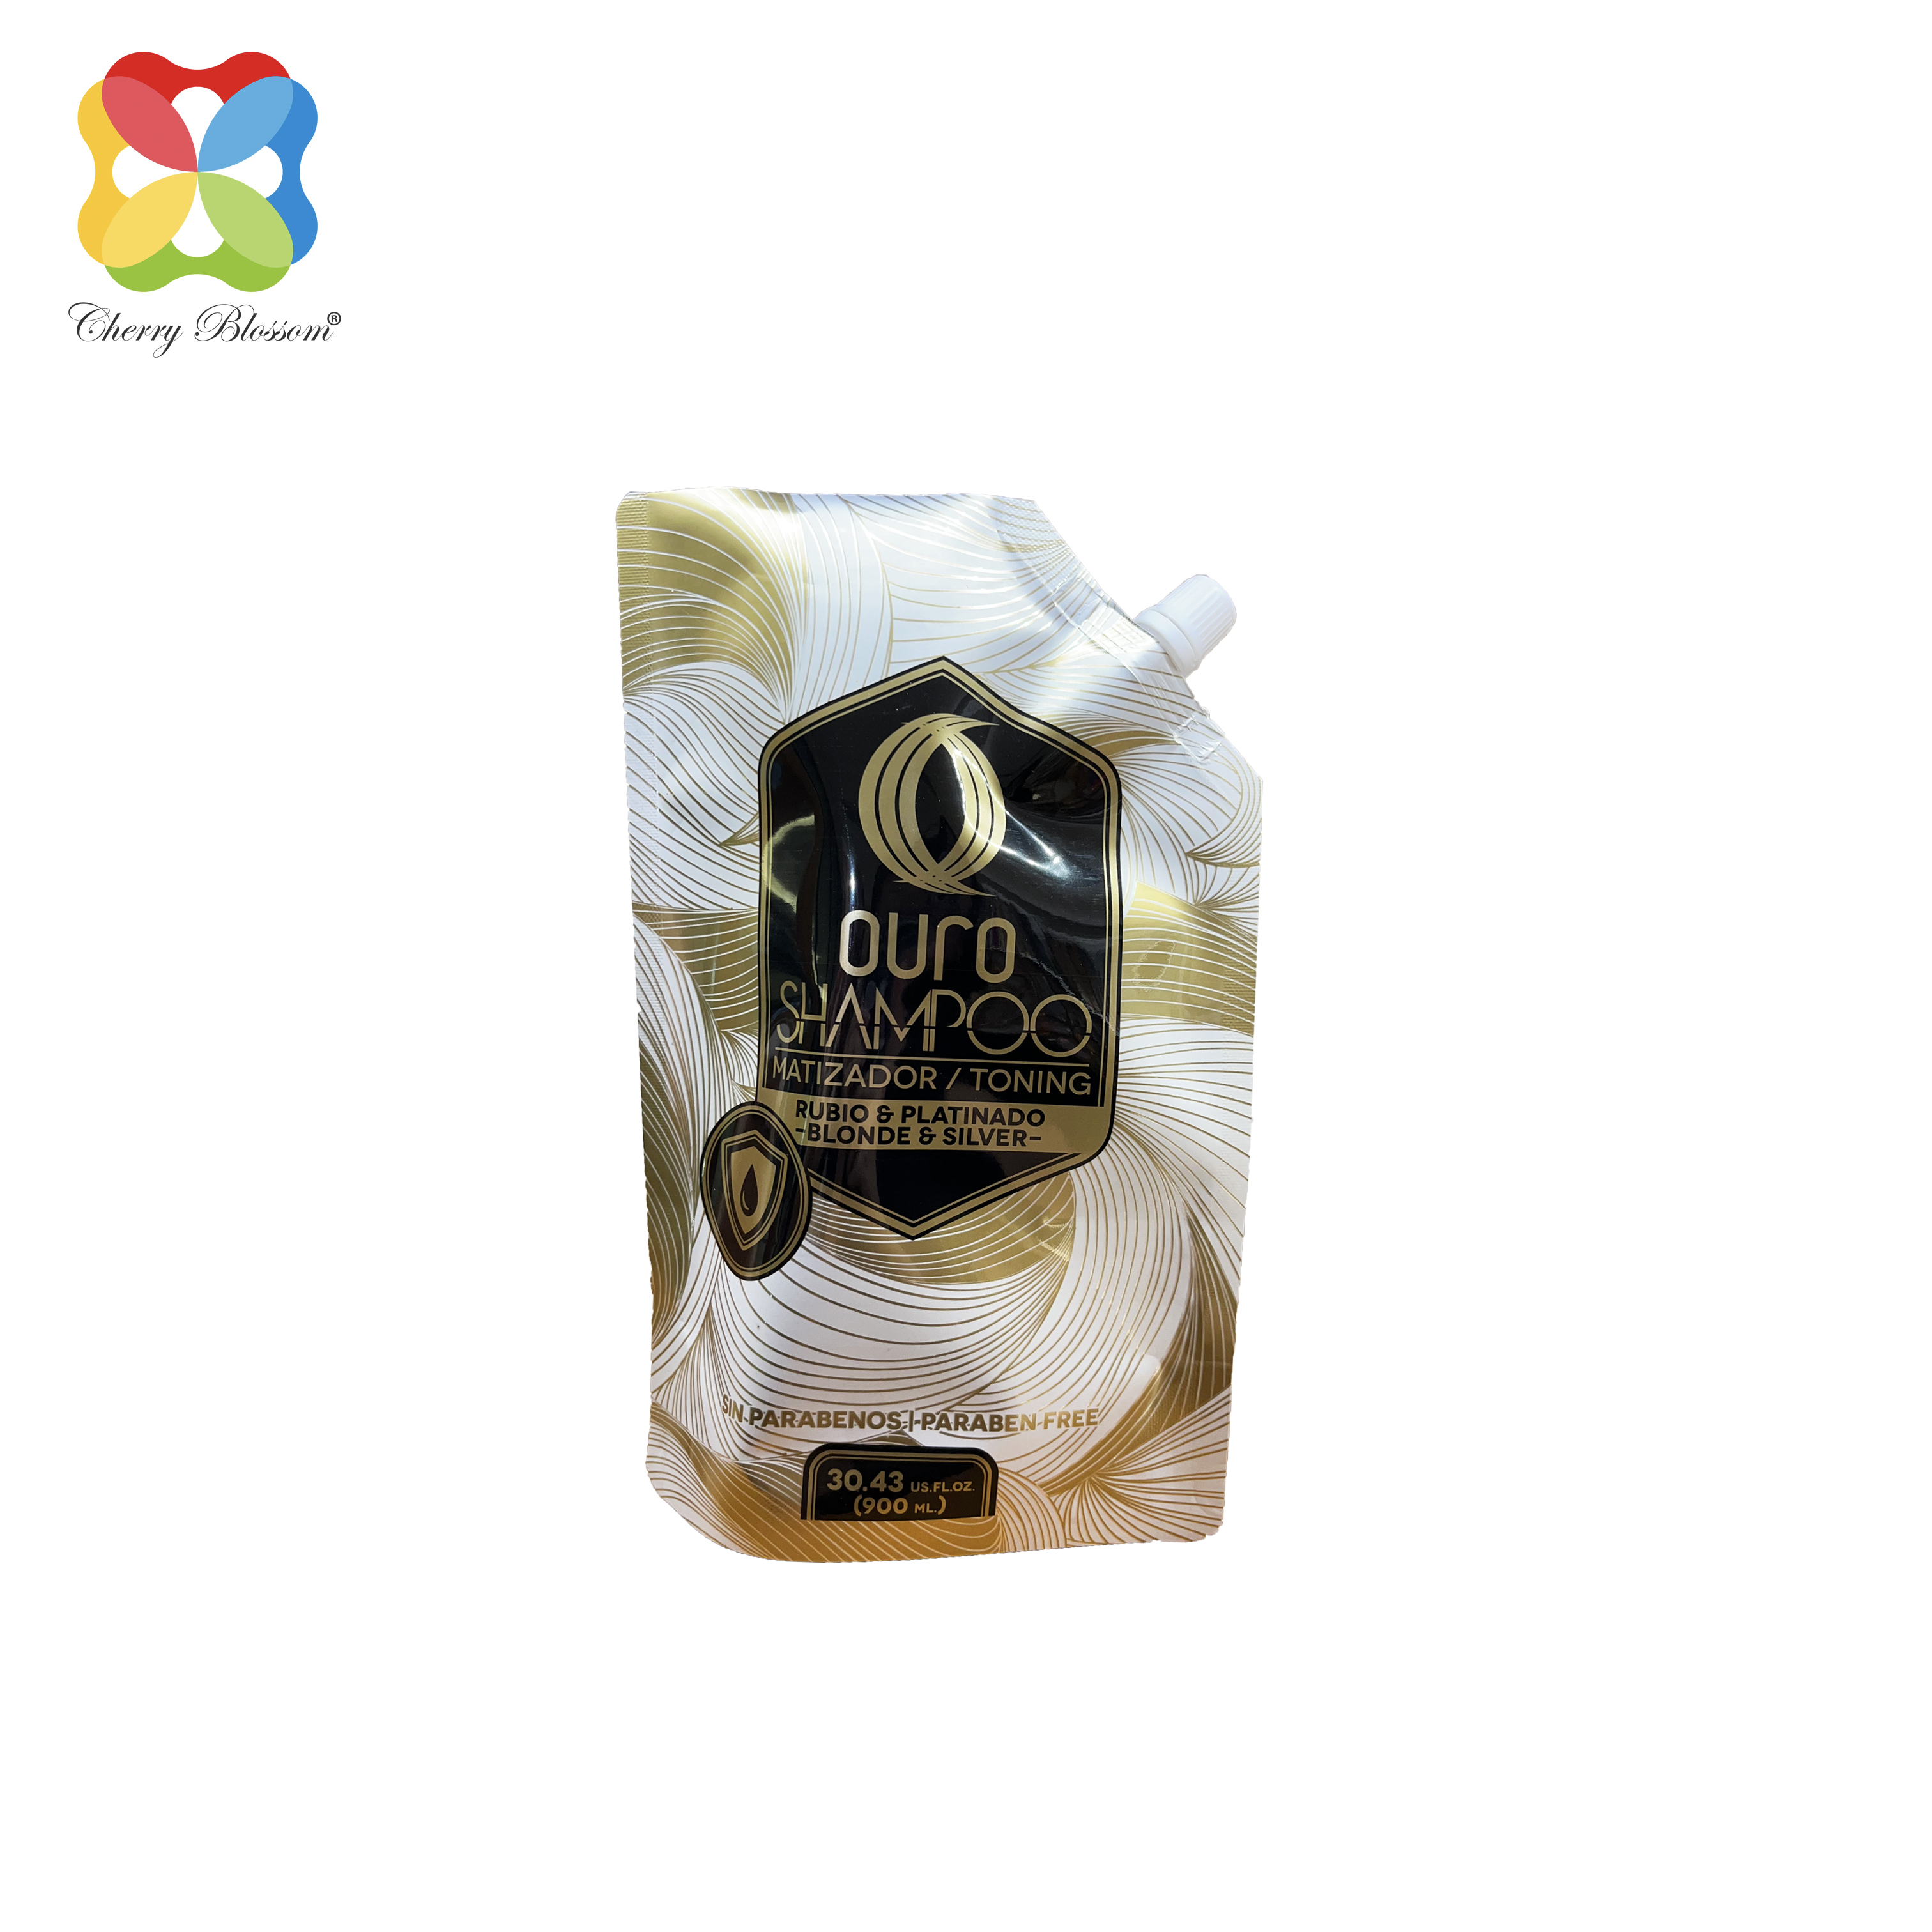 Shampoo Coconut Scent Stand-up Packaging mei Spuit Oanpast Gravure Printing Shampoo Packaging